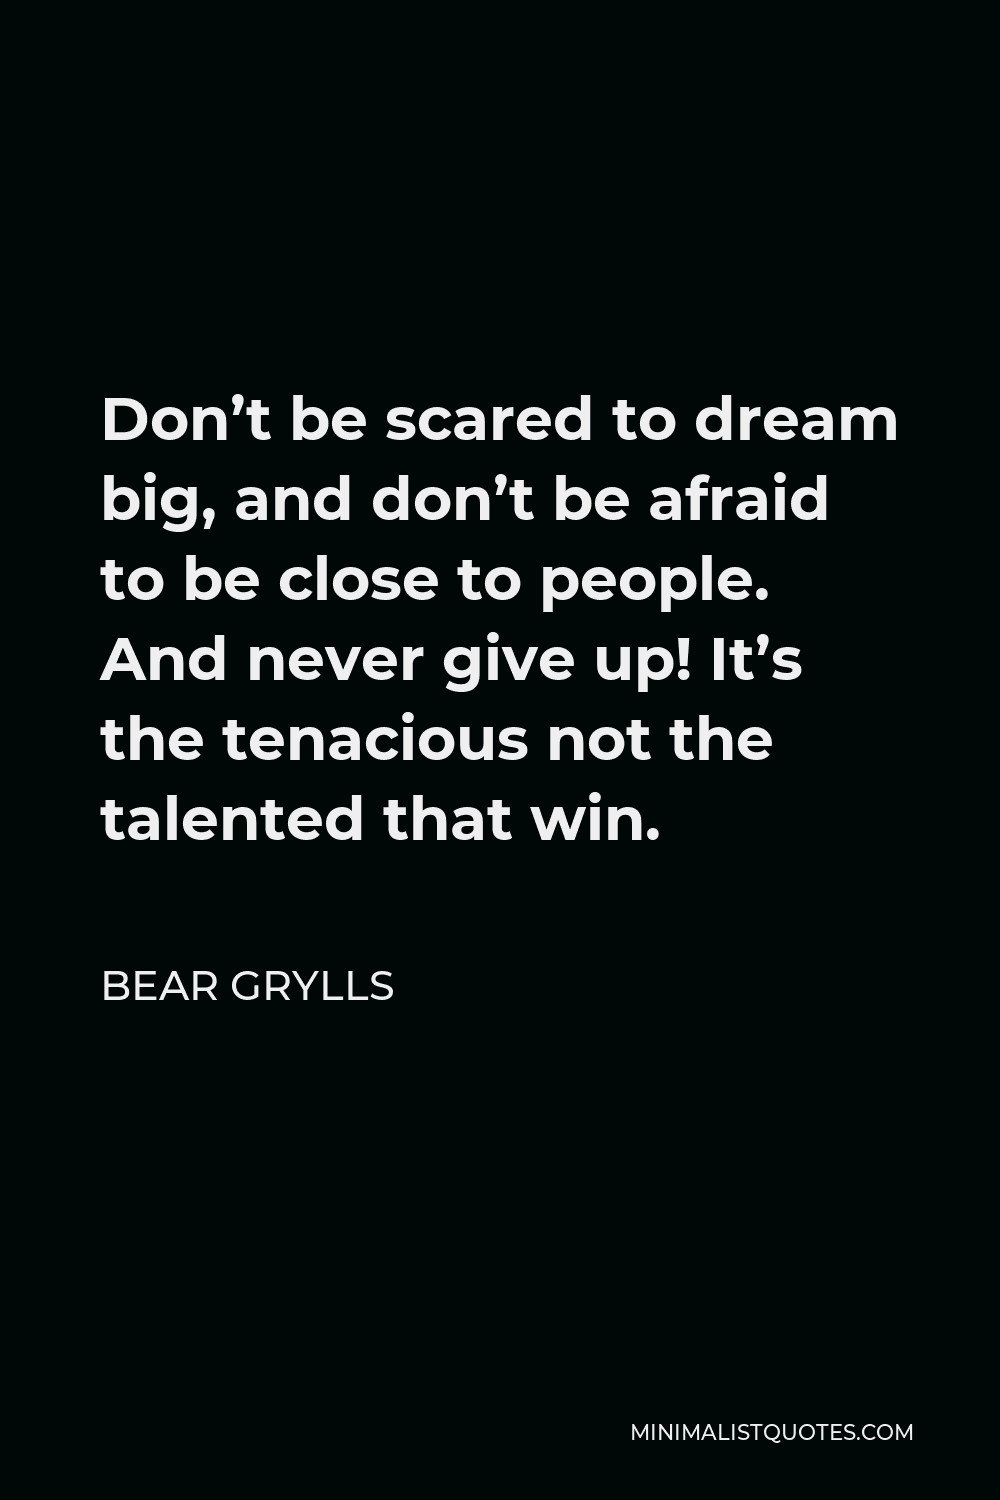 Bear Grylls Quote - Don’t be scared to dream big, and don’t be afraid to be close to people. And never give up! It’s the tenacious not the talented that win.